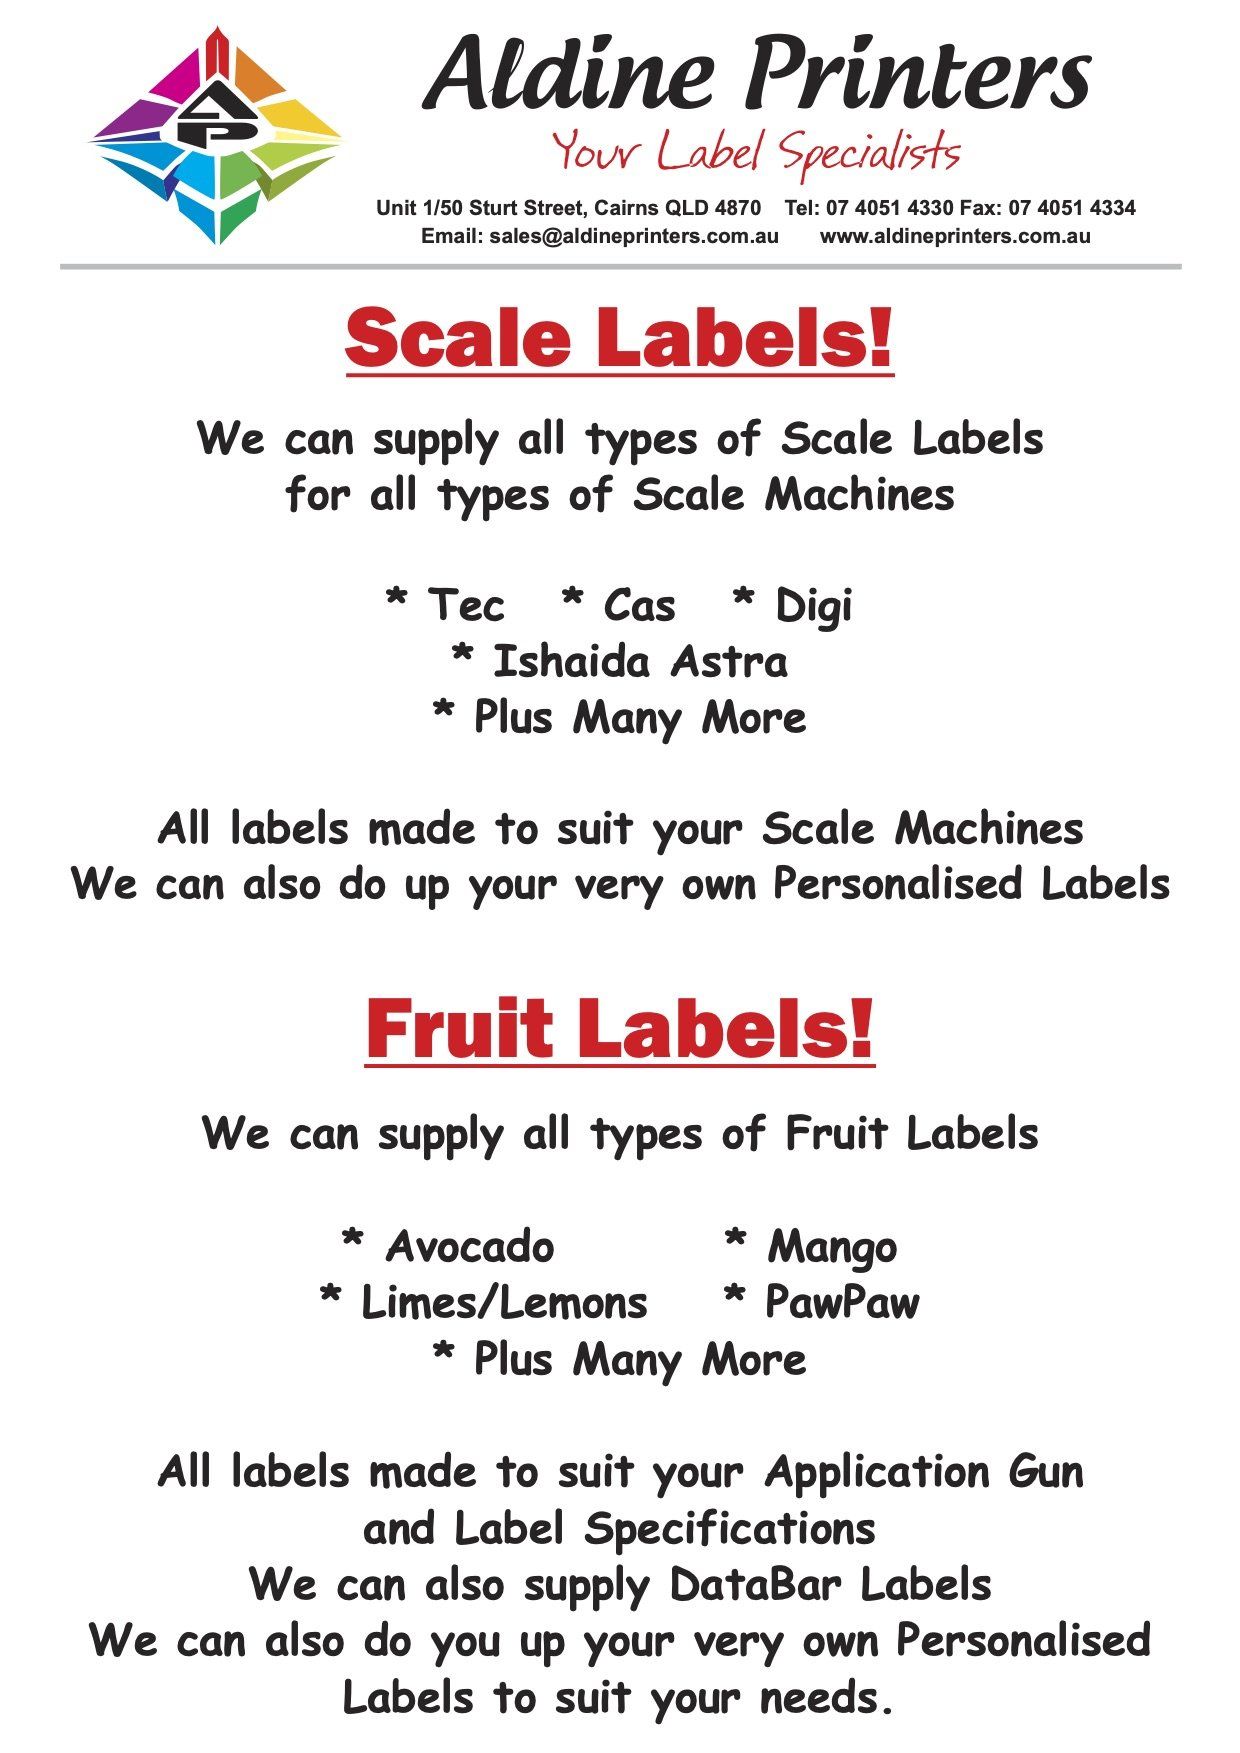 Scale and Fruit label